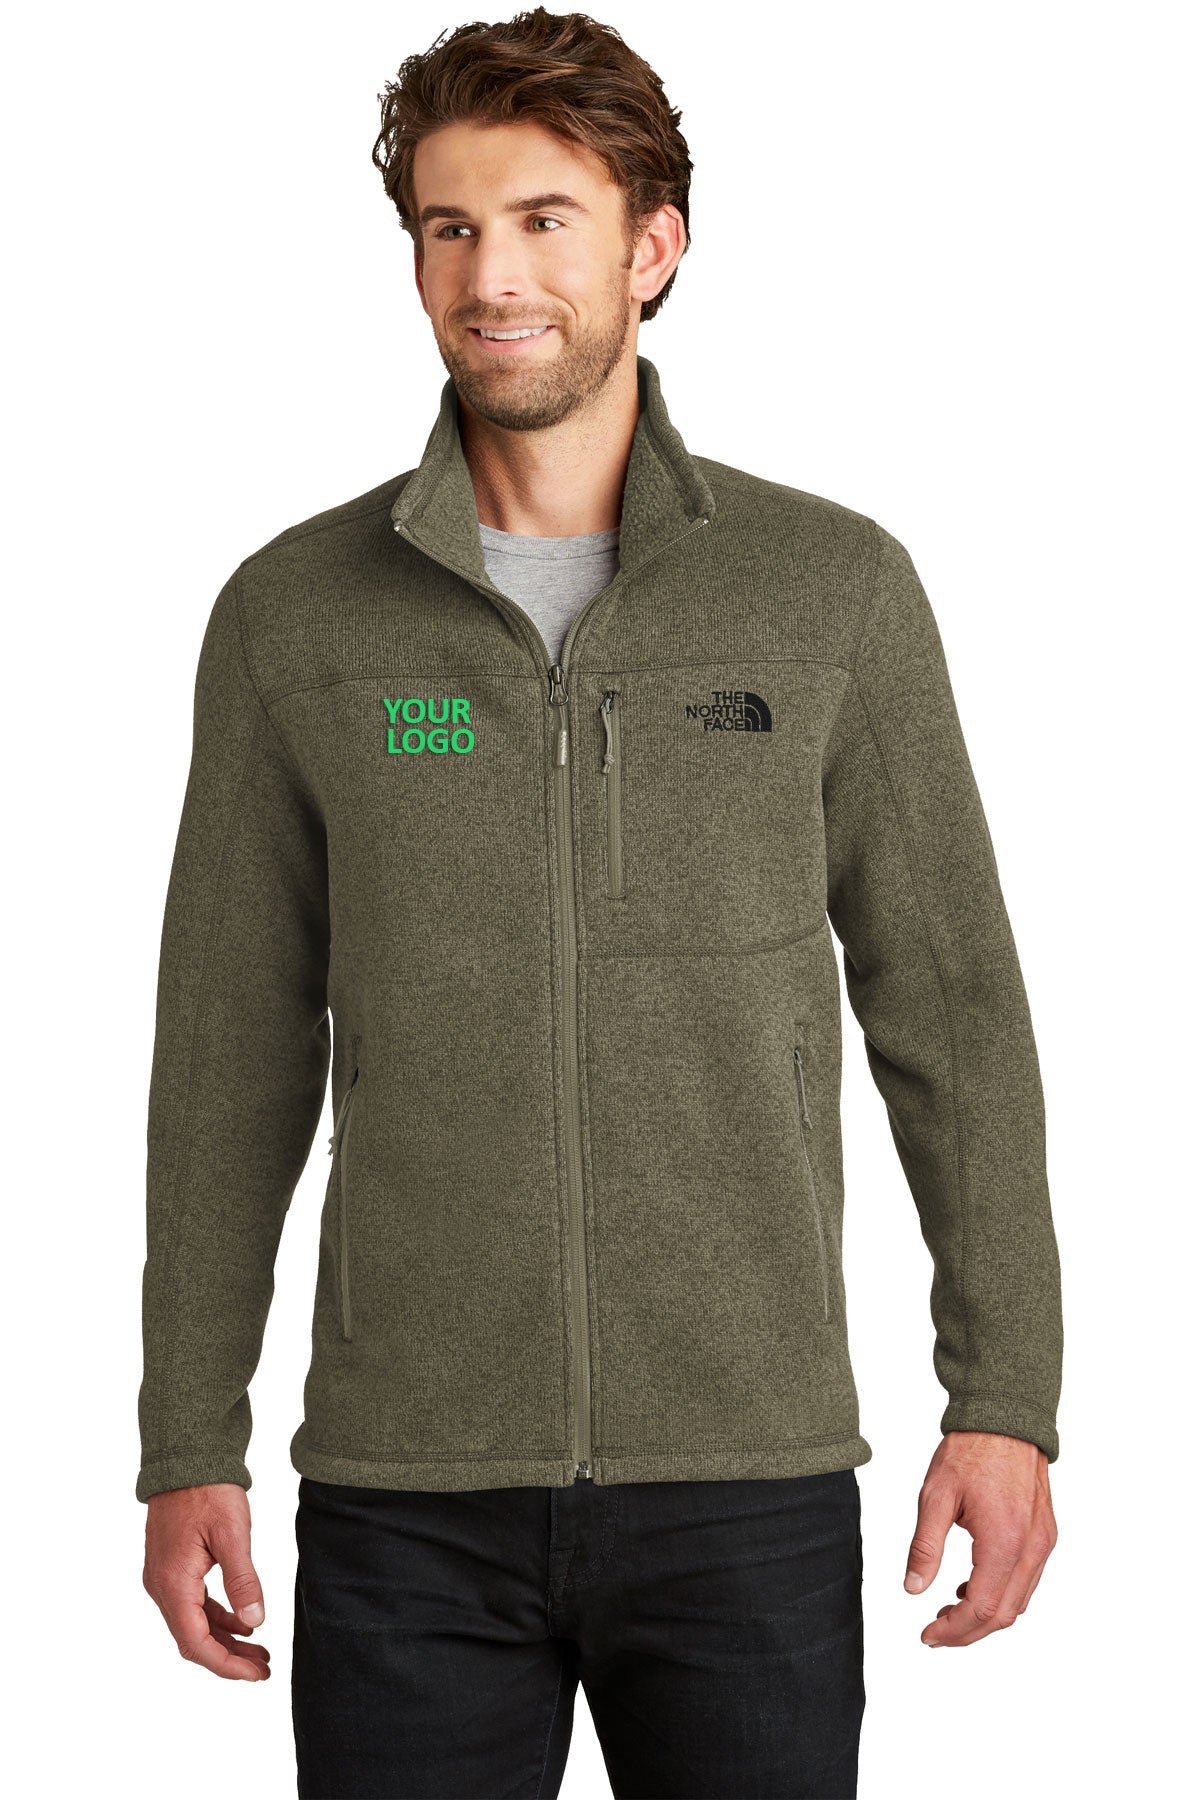 The North Face New Taupe Green Heather NF0A3LH7 custom jackets with logo